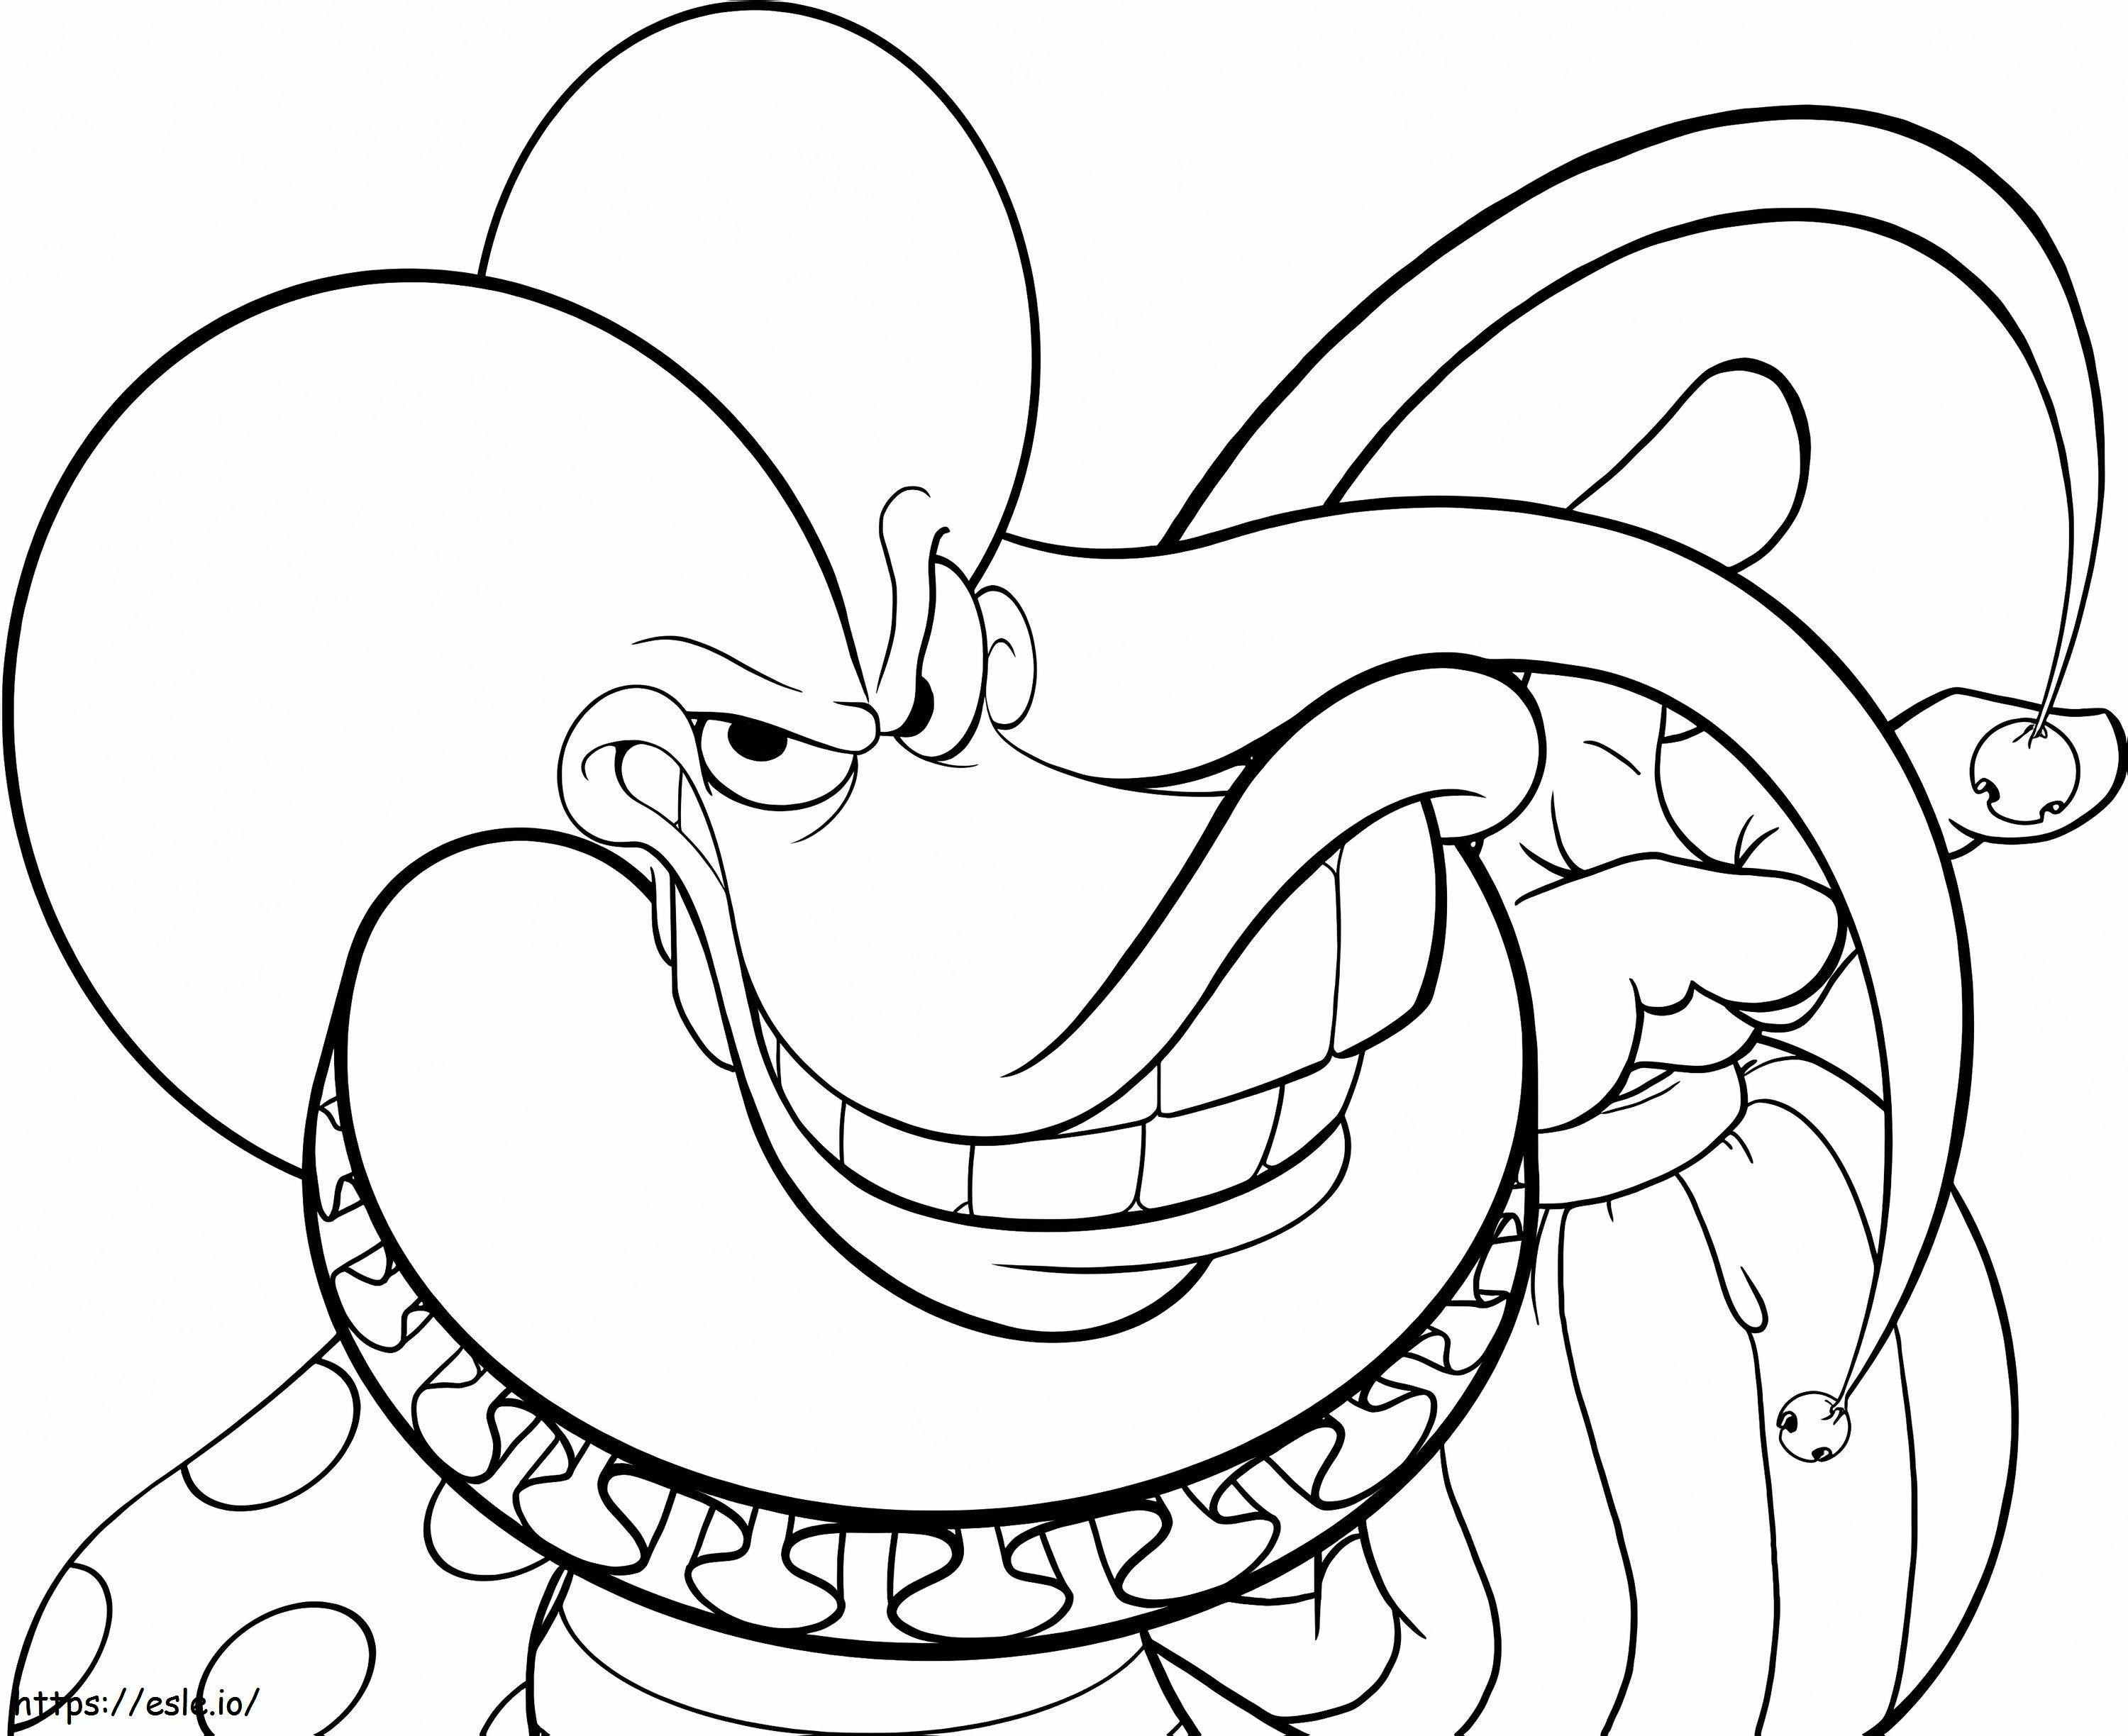 Quackerjack From Darkwing Duck coloring page